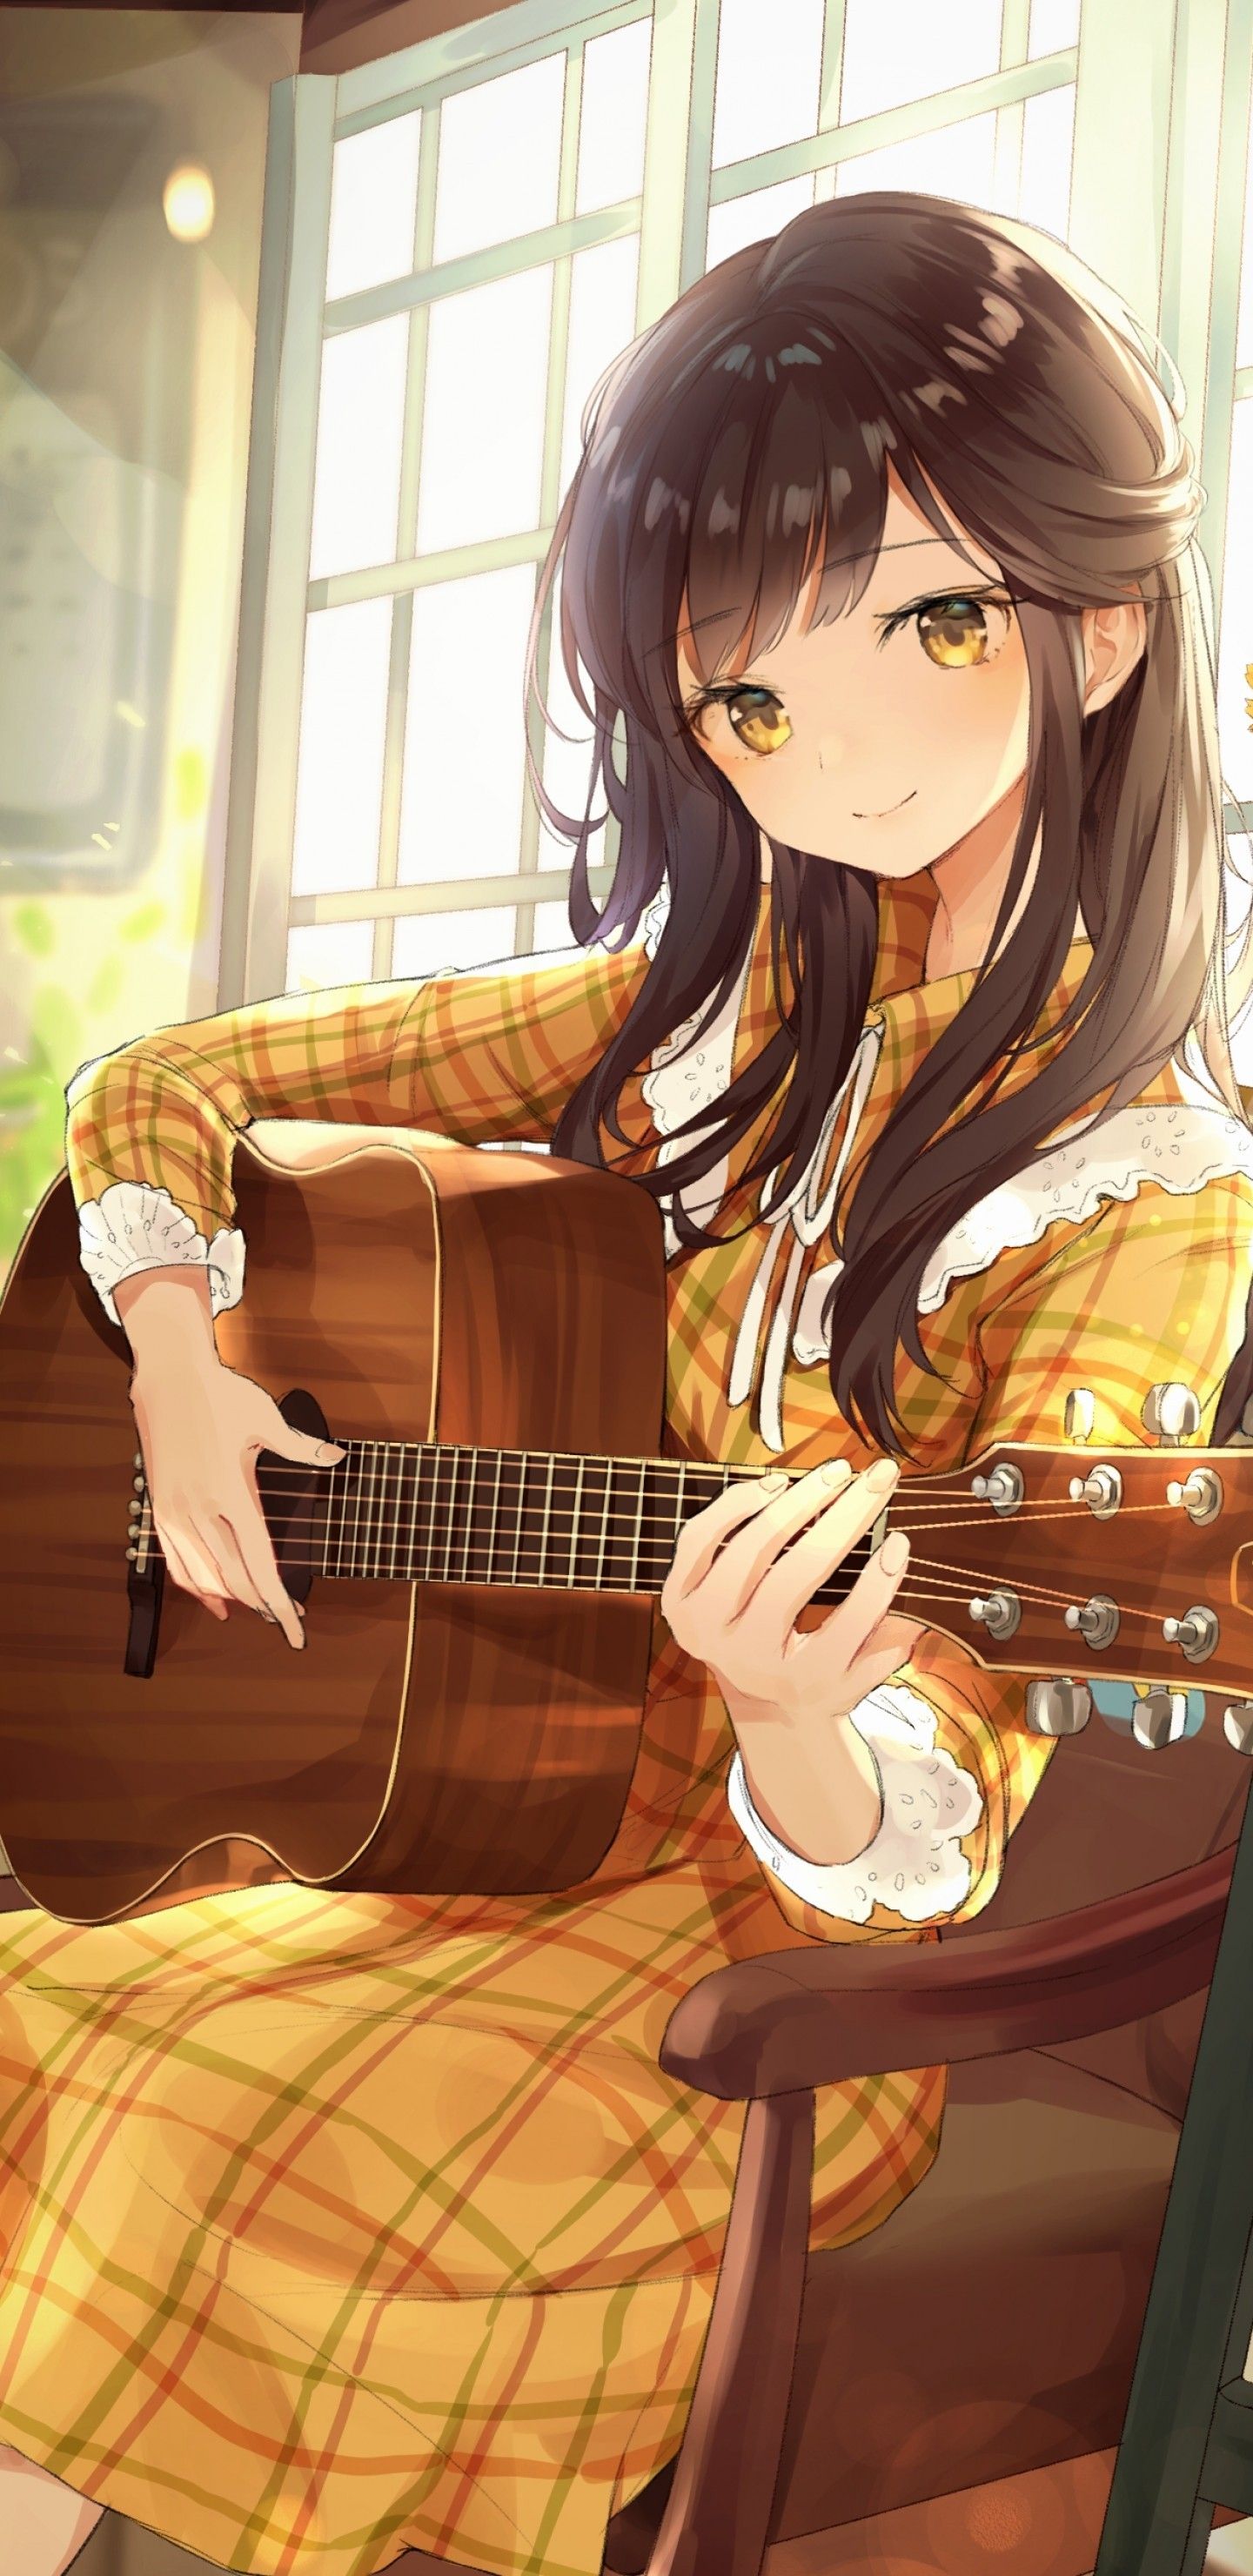 Download 1440x2960 Anime Girl, Playing Guitar, Instrument, Music, Cute, Brown Hair Wallpaper for Samsung Galaxy S Note S S8+, Google Pixel 3 XL